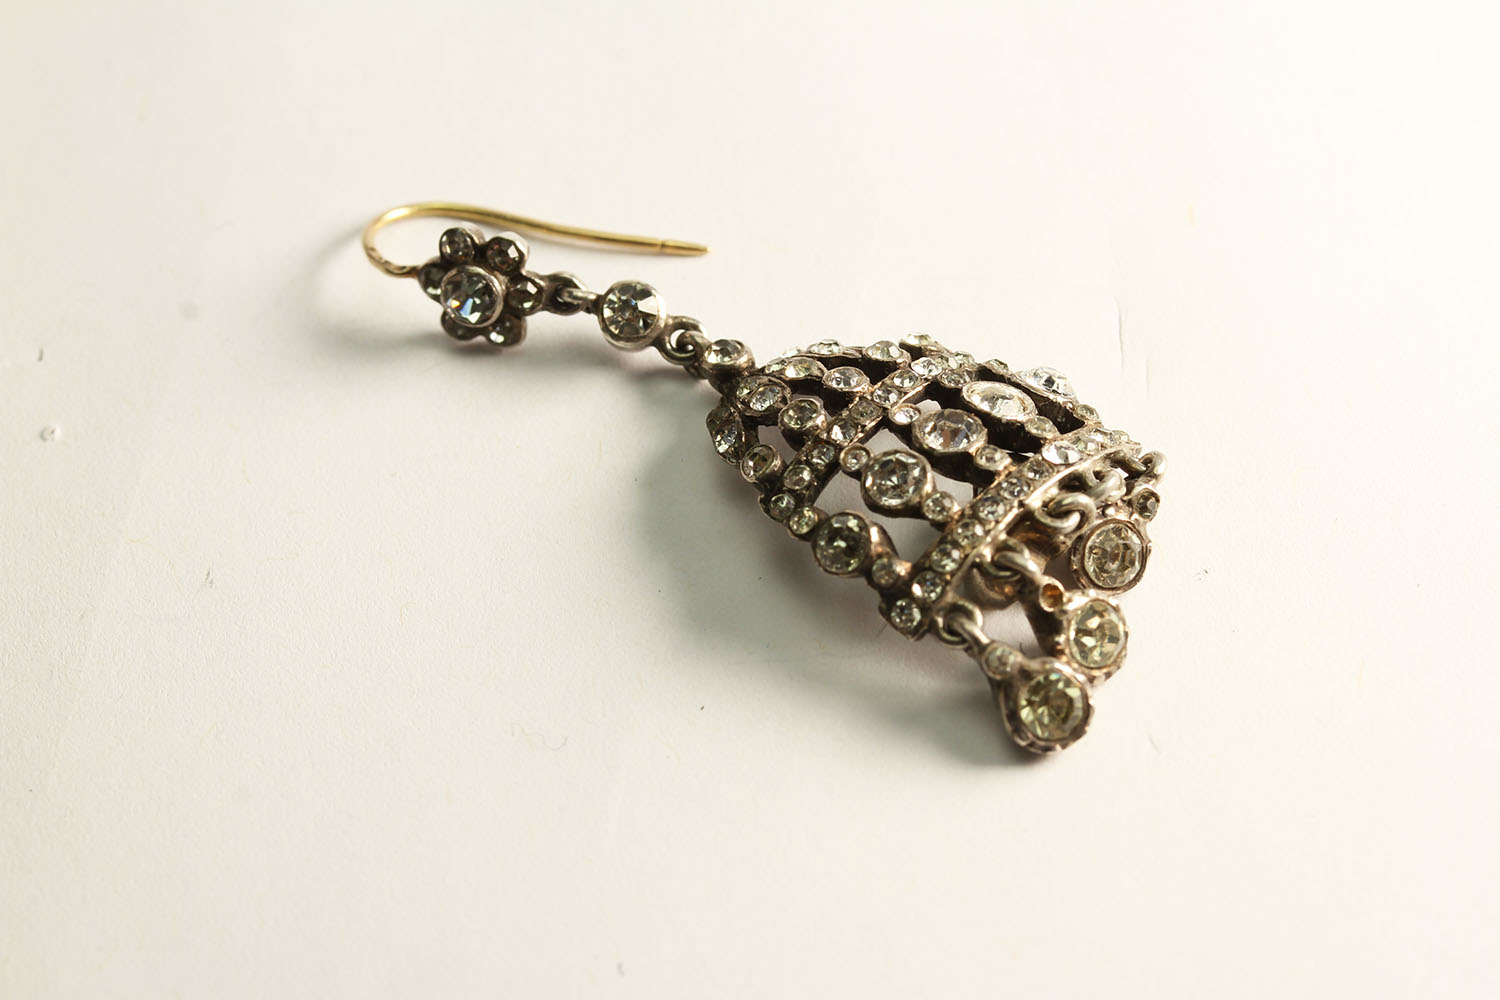 GOLD AND SILVER WHITE PASTE CHANDELIER DROP EARRINGS, 3.3X2.2CMS,on gold wires. - Image 2 of 2